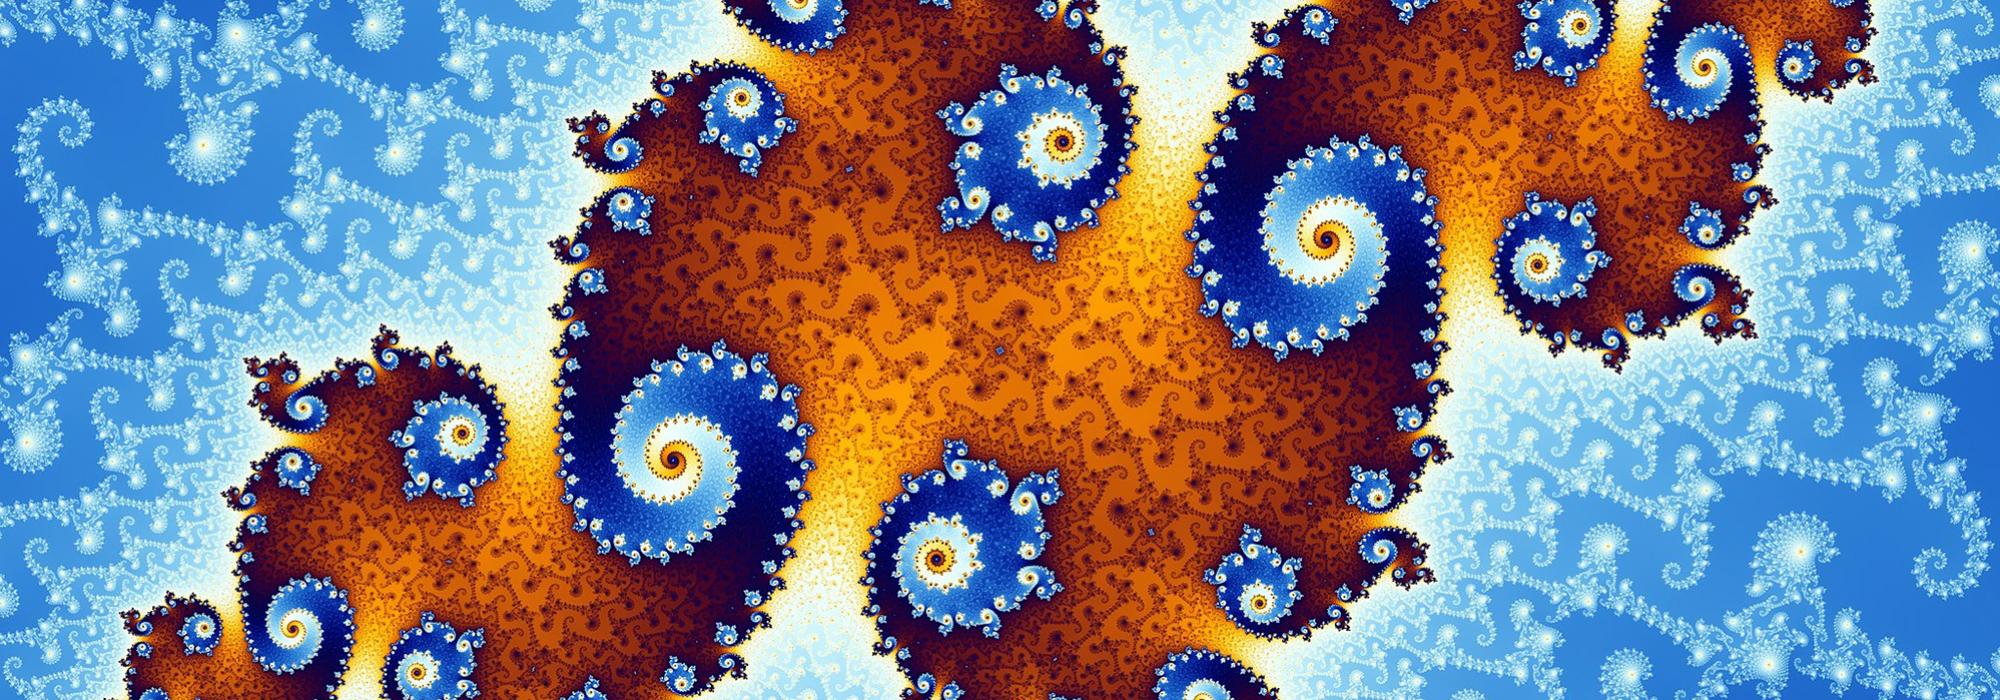 Partial view of a Mandelbrot set, created by Wolfgang Beyer with the program Ultra Fractal 3